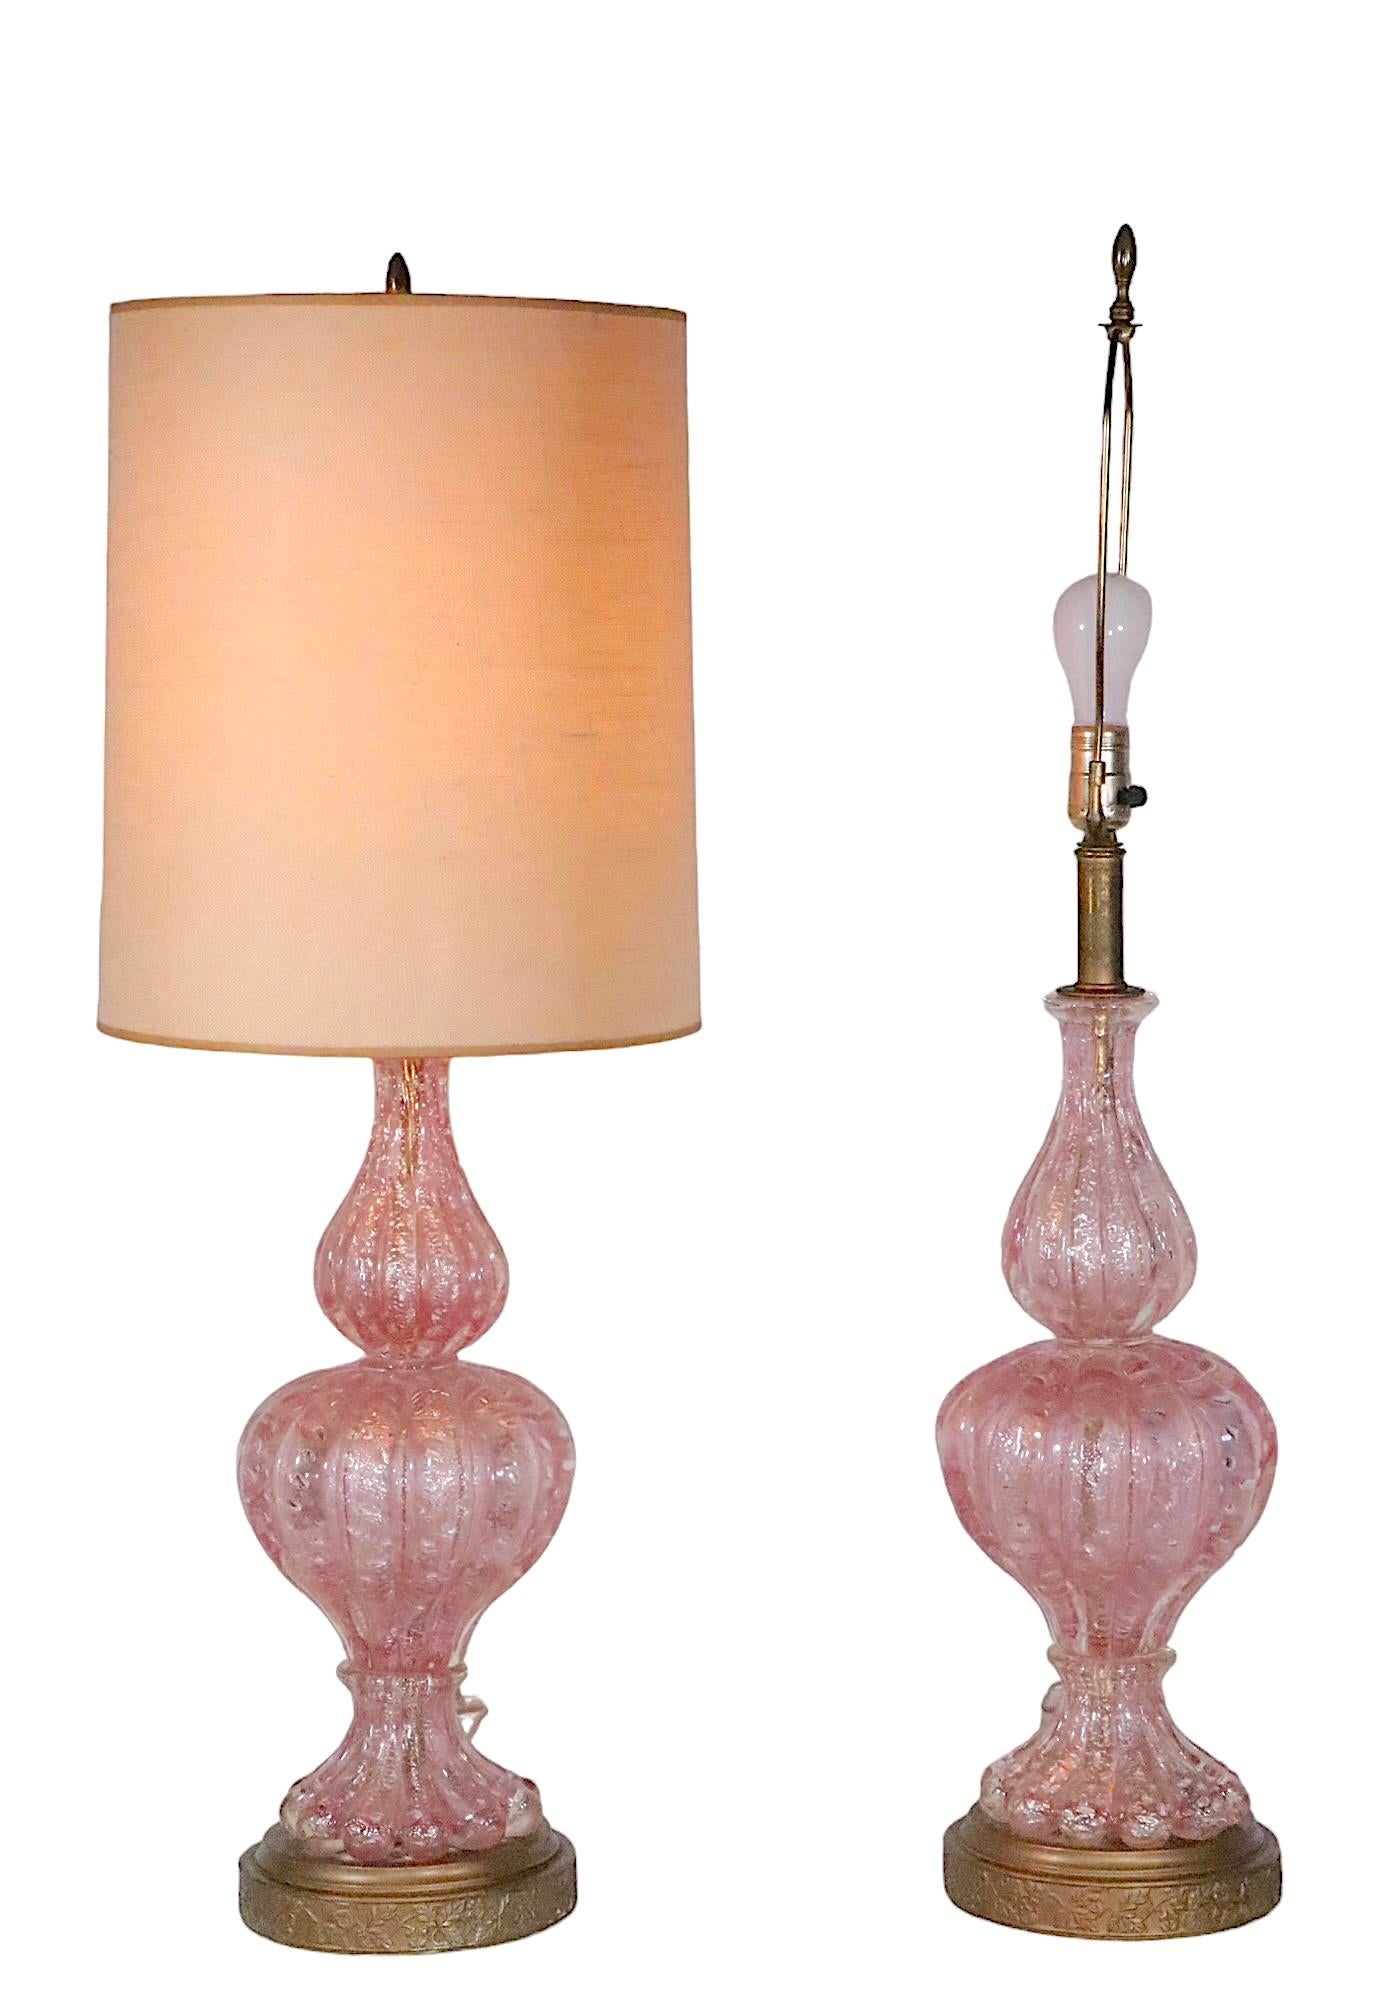 Mid-Century Modern Pr. Murano Art Glass Table Lamps Made in Italy  att.  to  Barovier c. 1950’s  For Sale